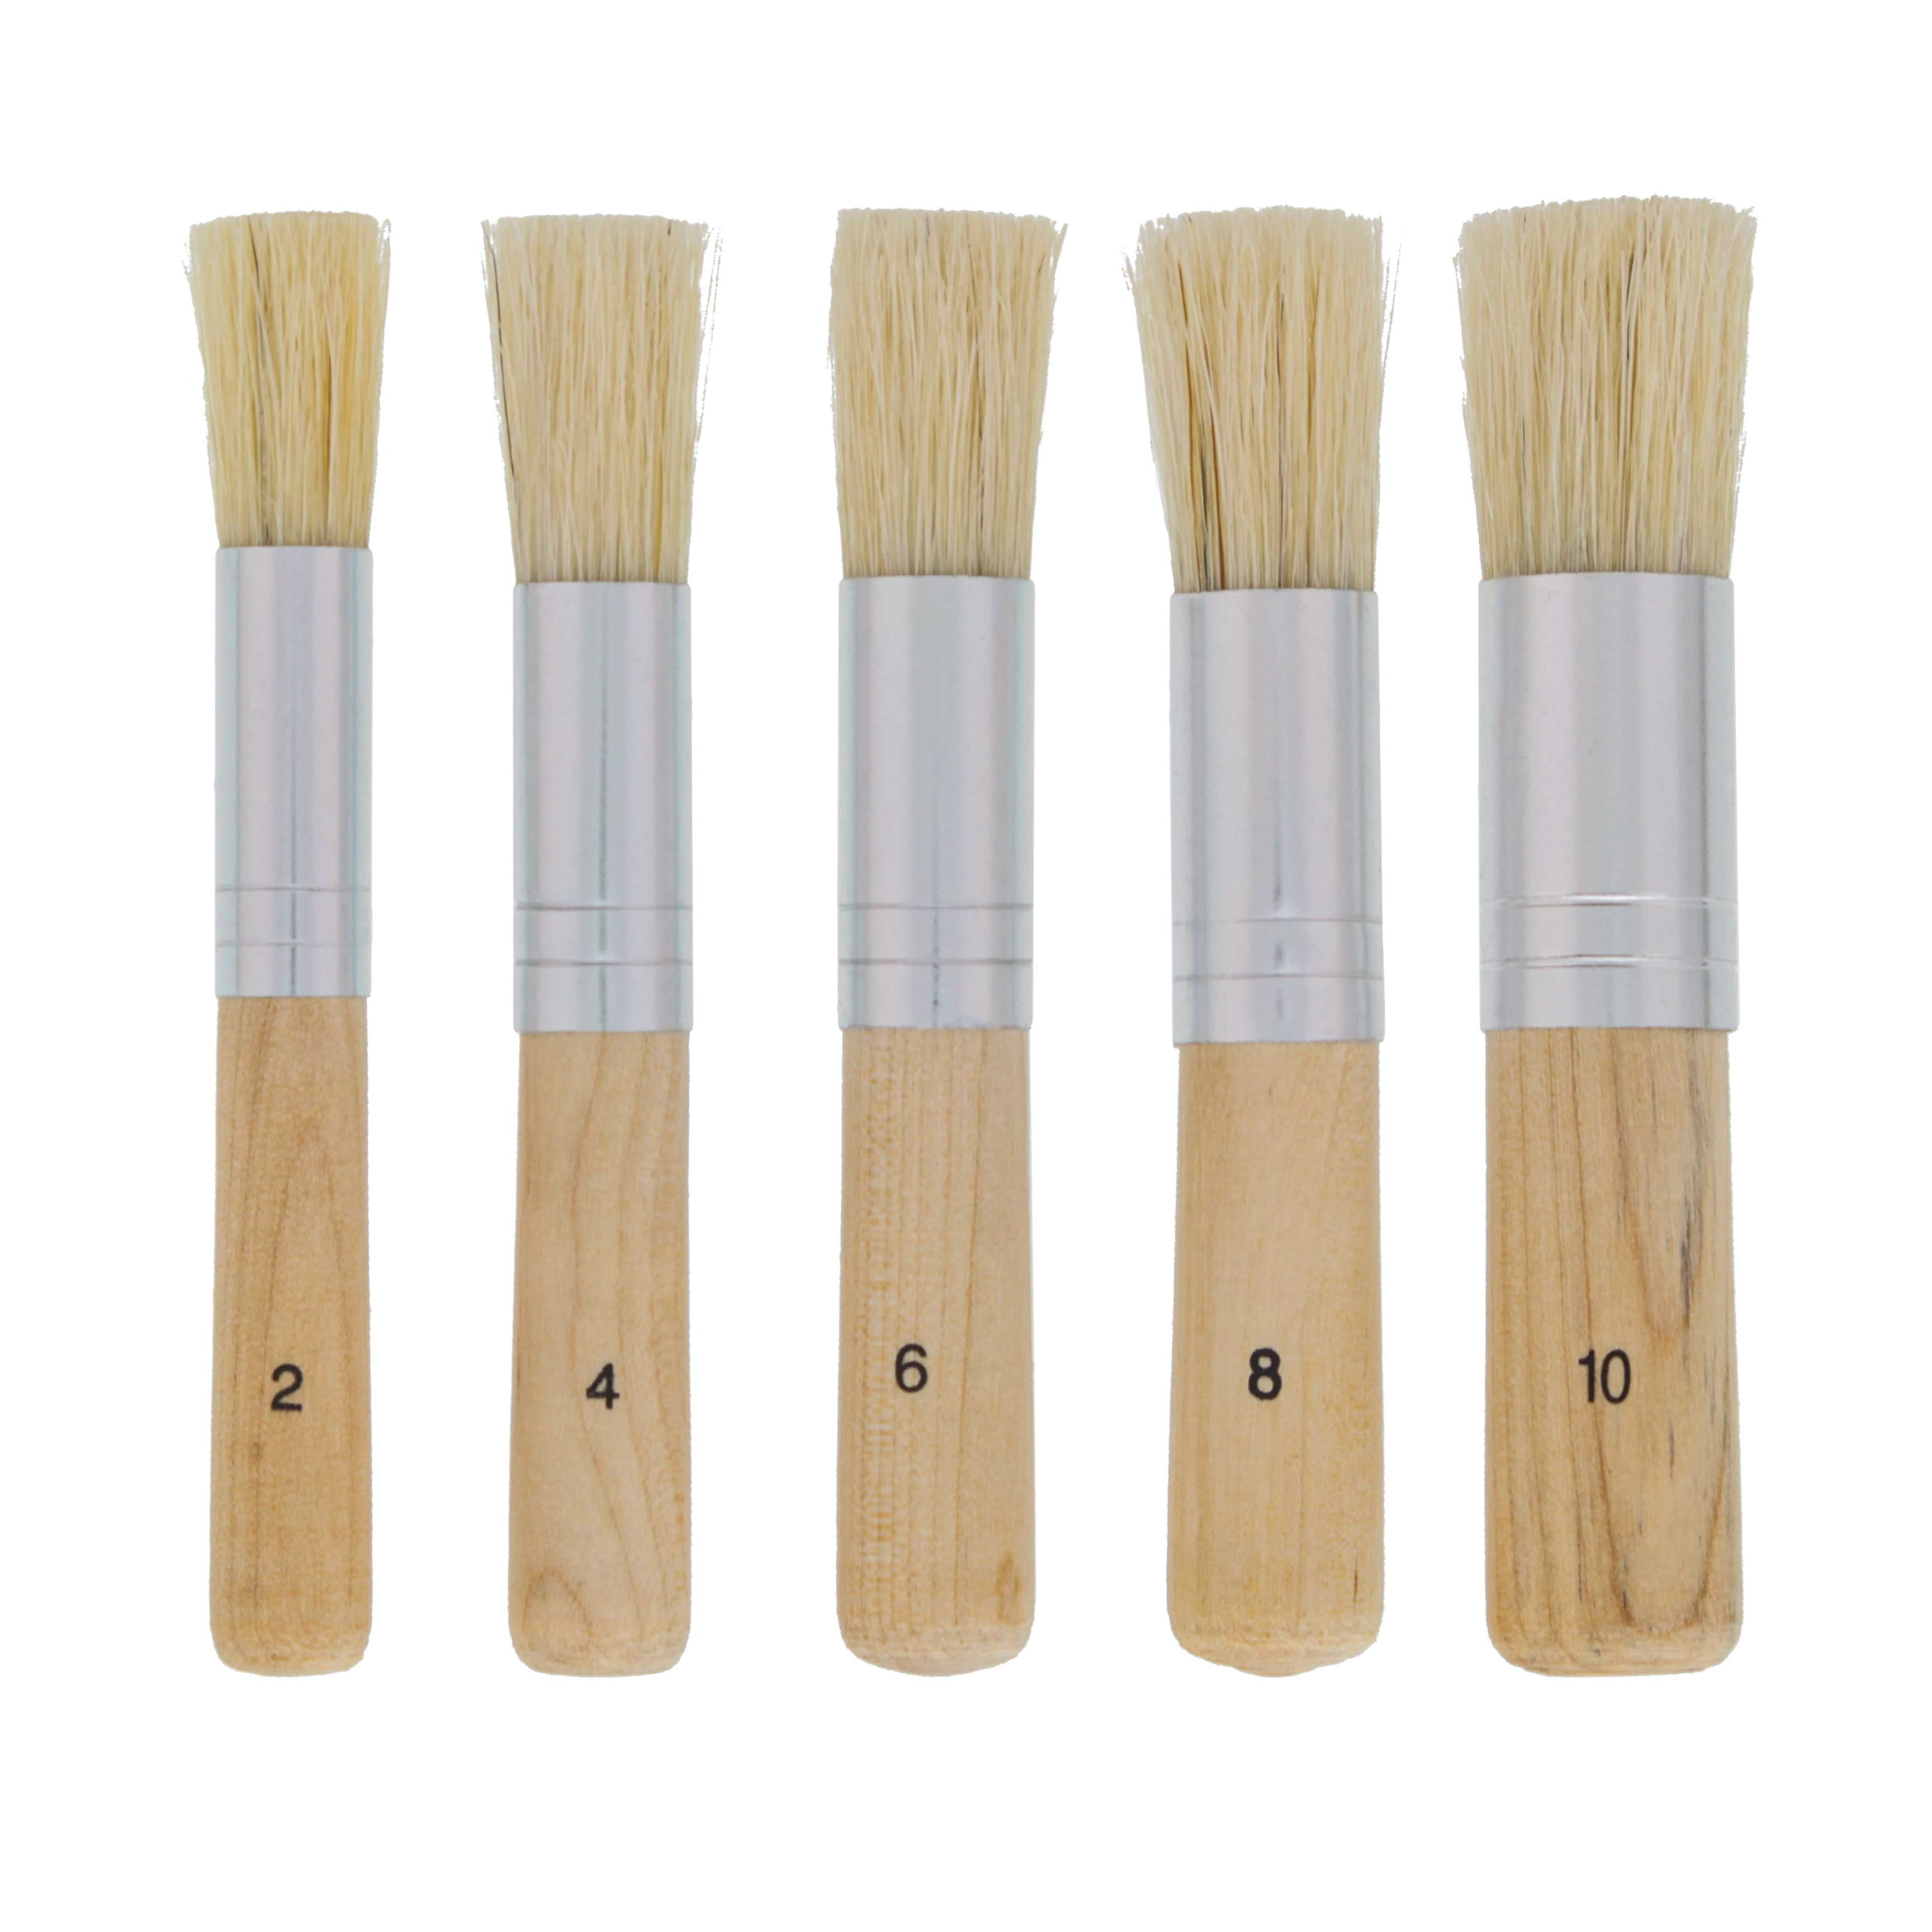 4 Pcs Chalk and Wax Paint Brushes,Natural Bristles Wooden Handle DIY Painting and Waxing Brushes for Art Craft Wood Furniture Home Decoration Waxing DIY Tools 